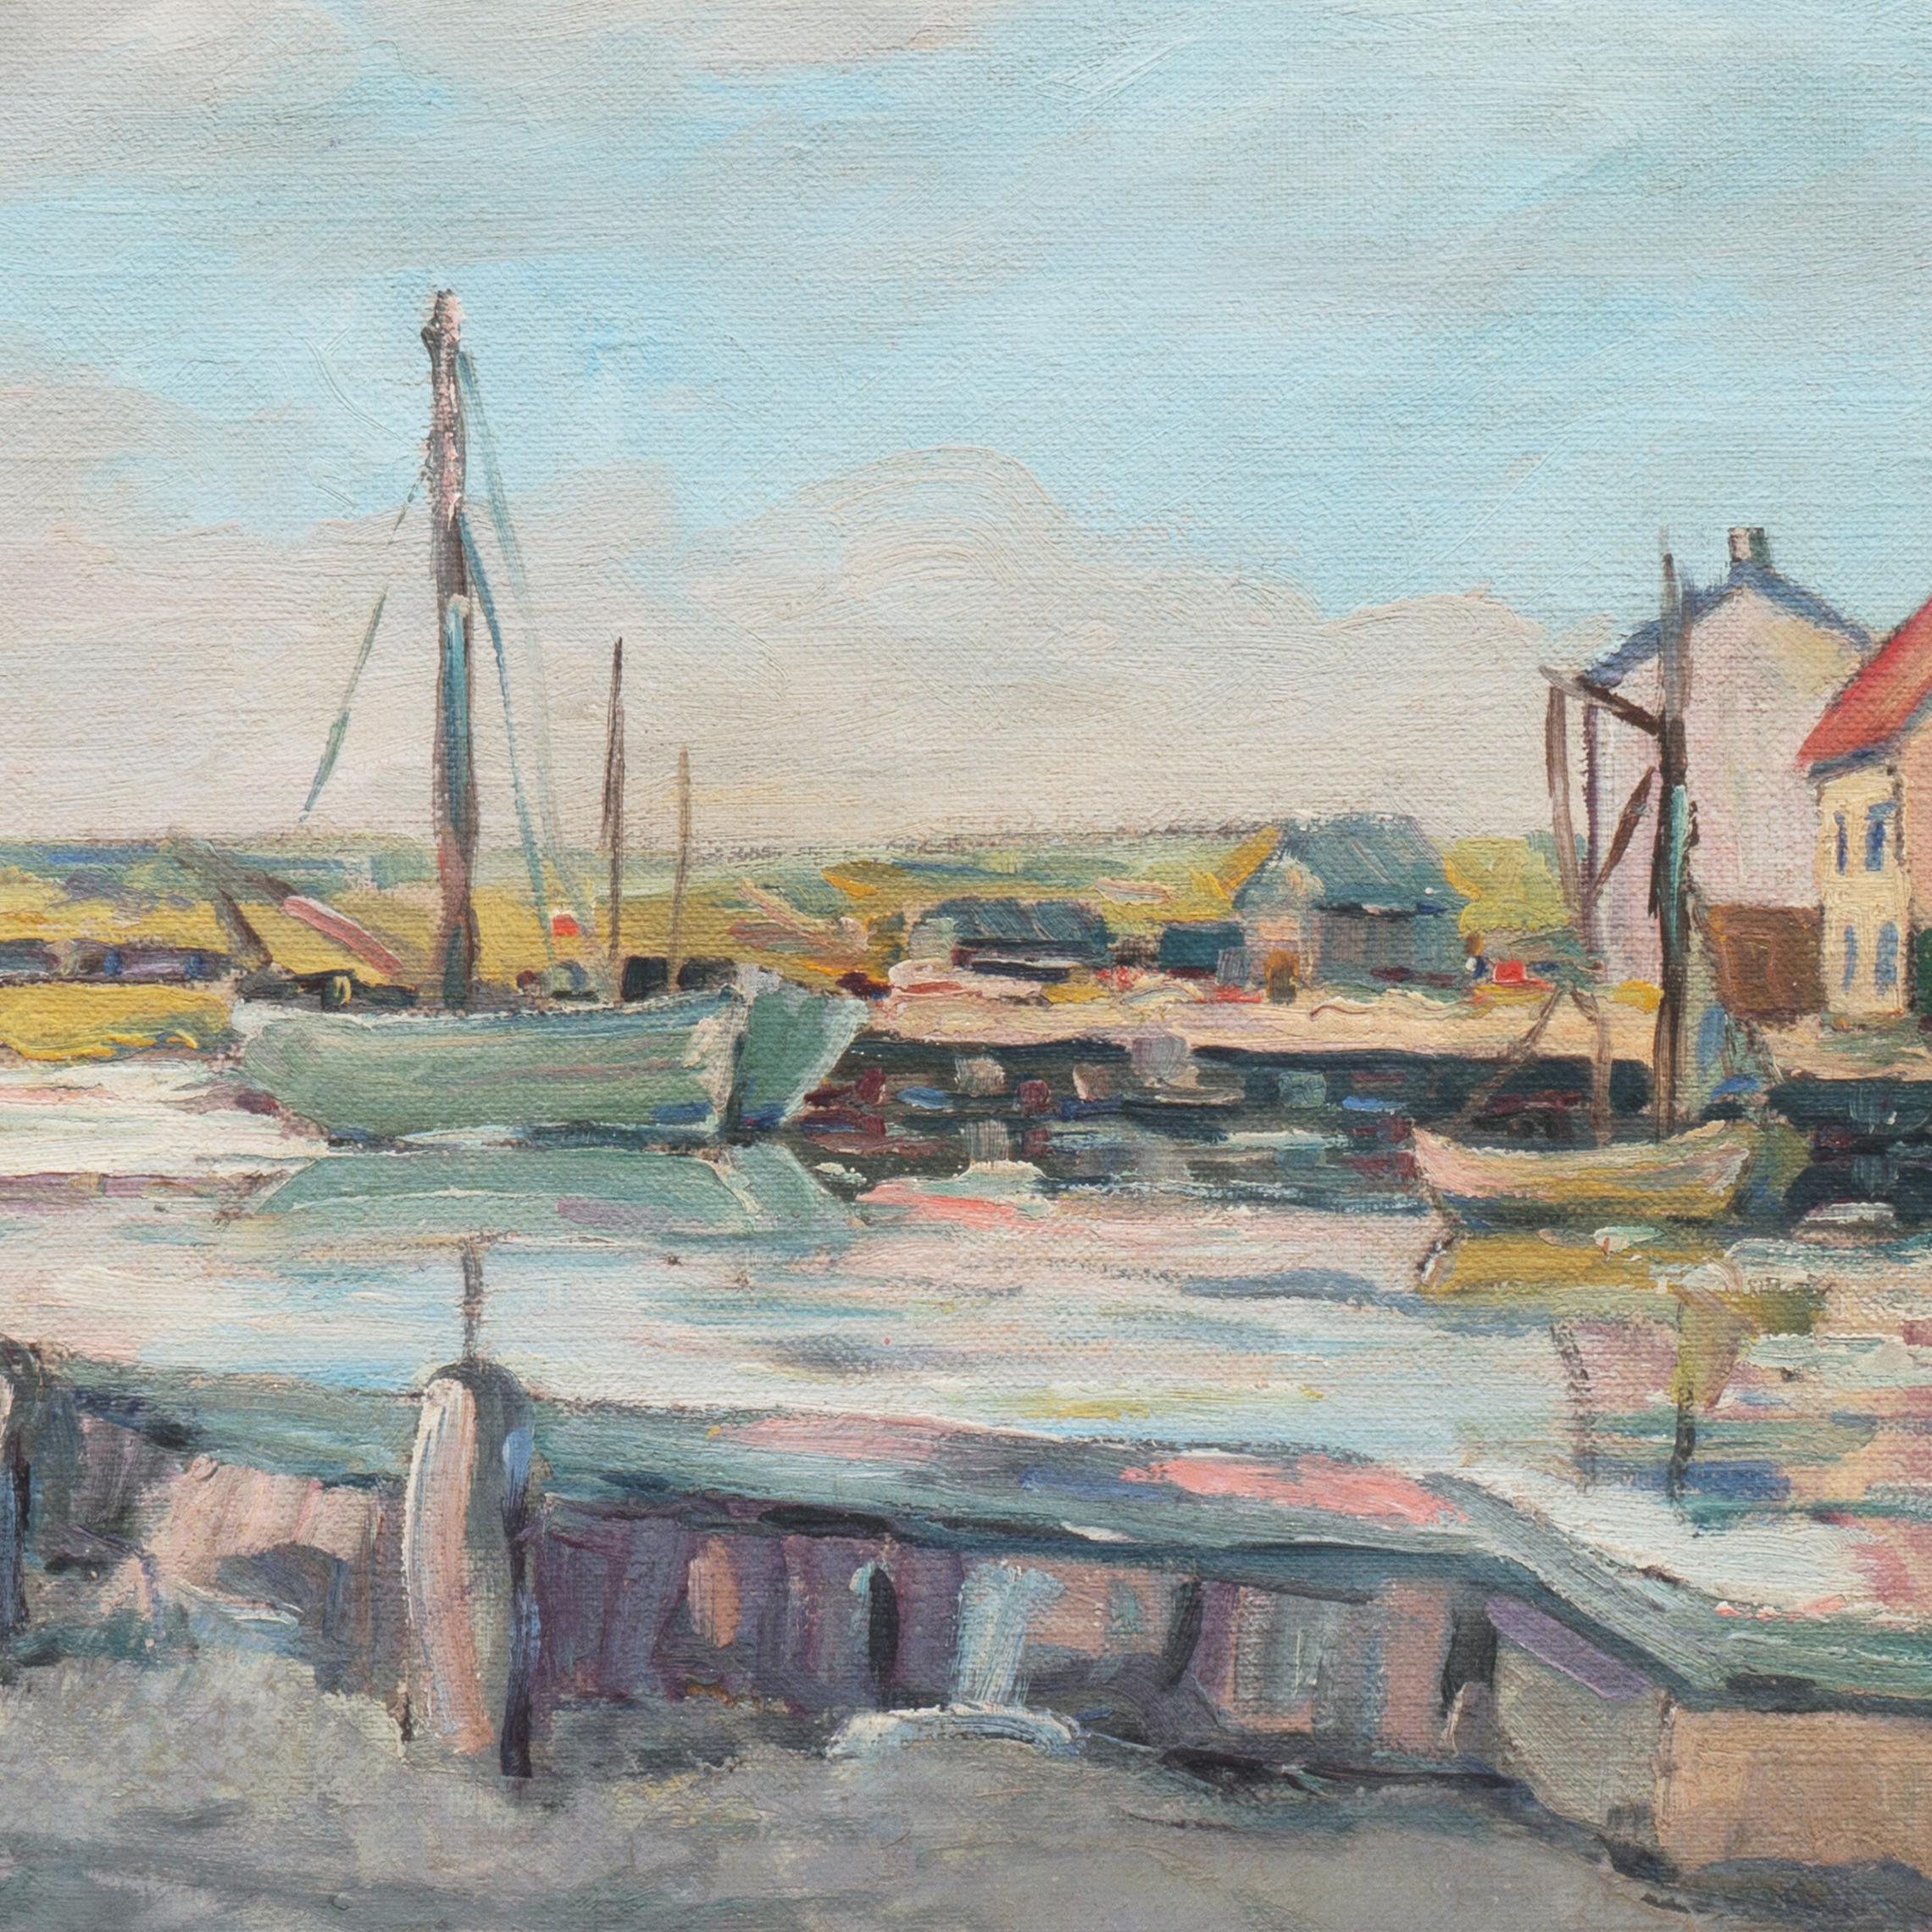 Initialed 'J.H.' lower right and painted circa 1950.

A delicately painted Impressionist marine oil showing sailing boats moored to a jetty beyond a harbor wall beneath a sunset sky.